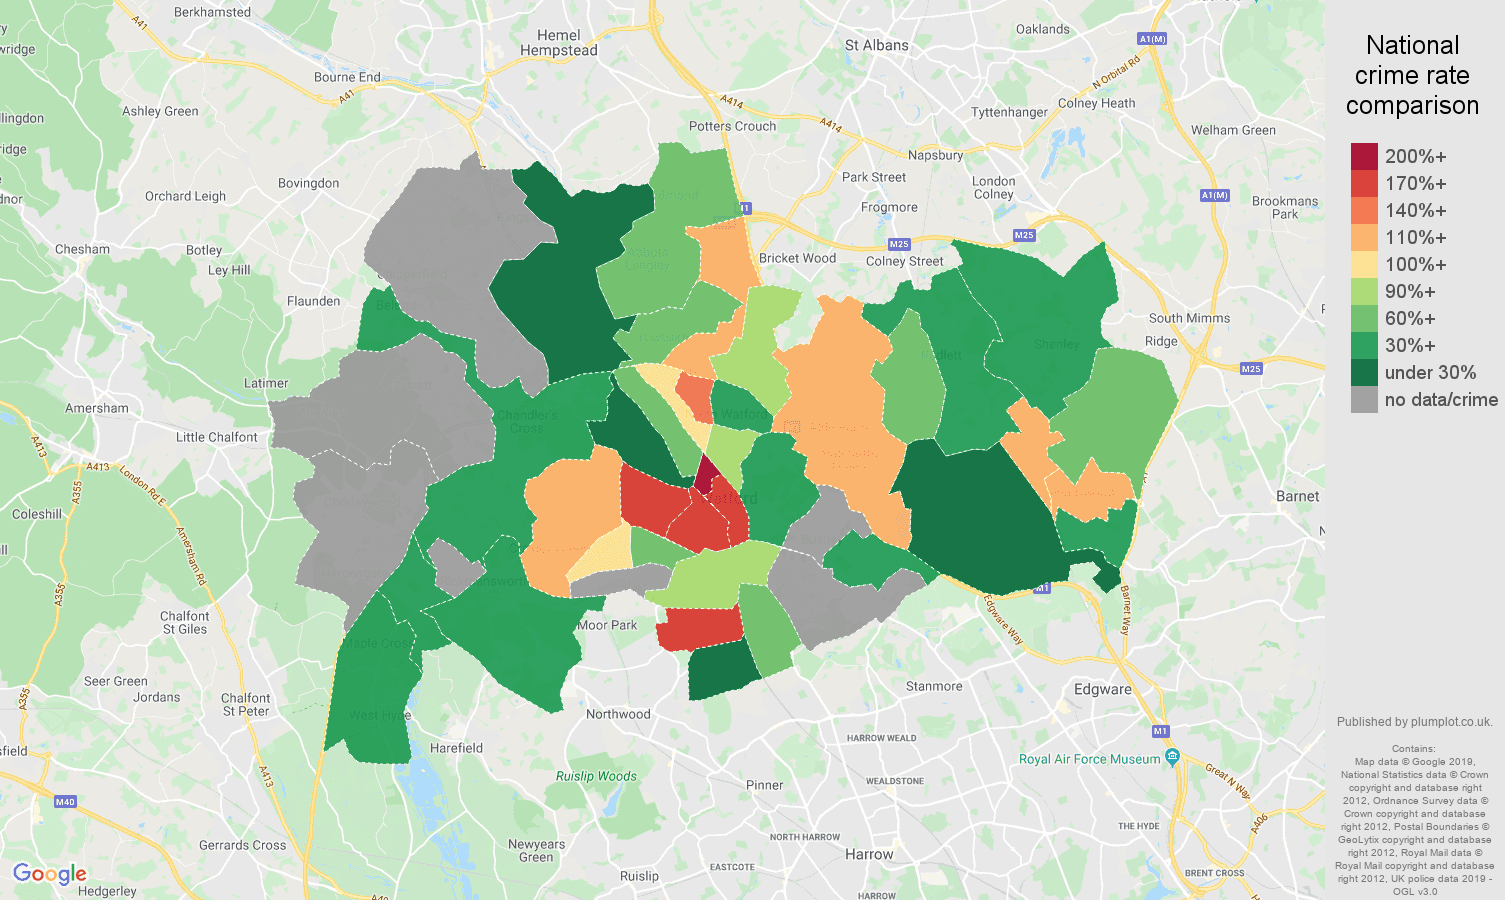 Watford possession of weapons crime rate comparison map